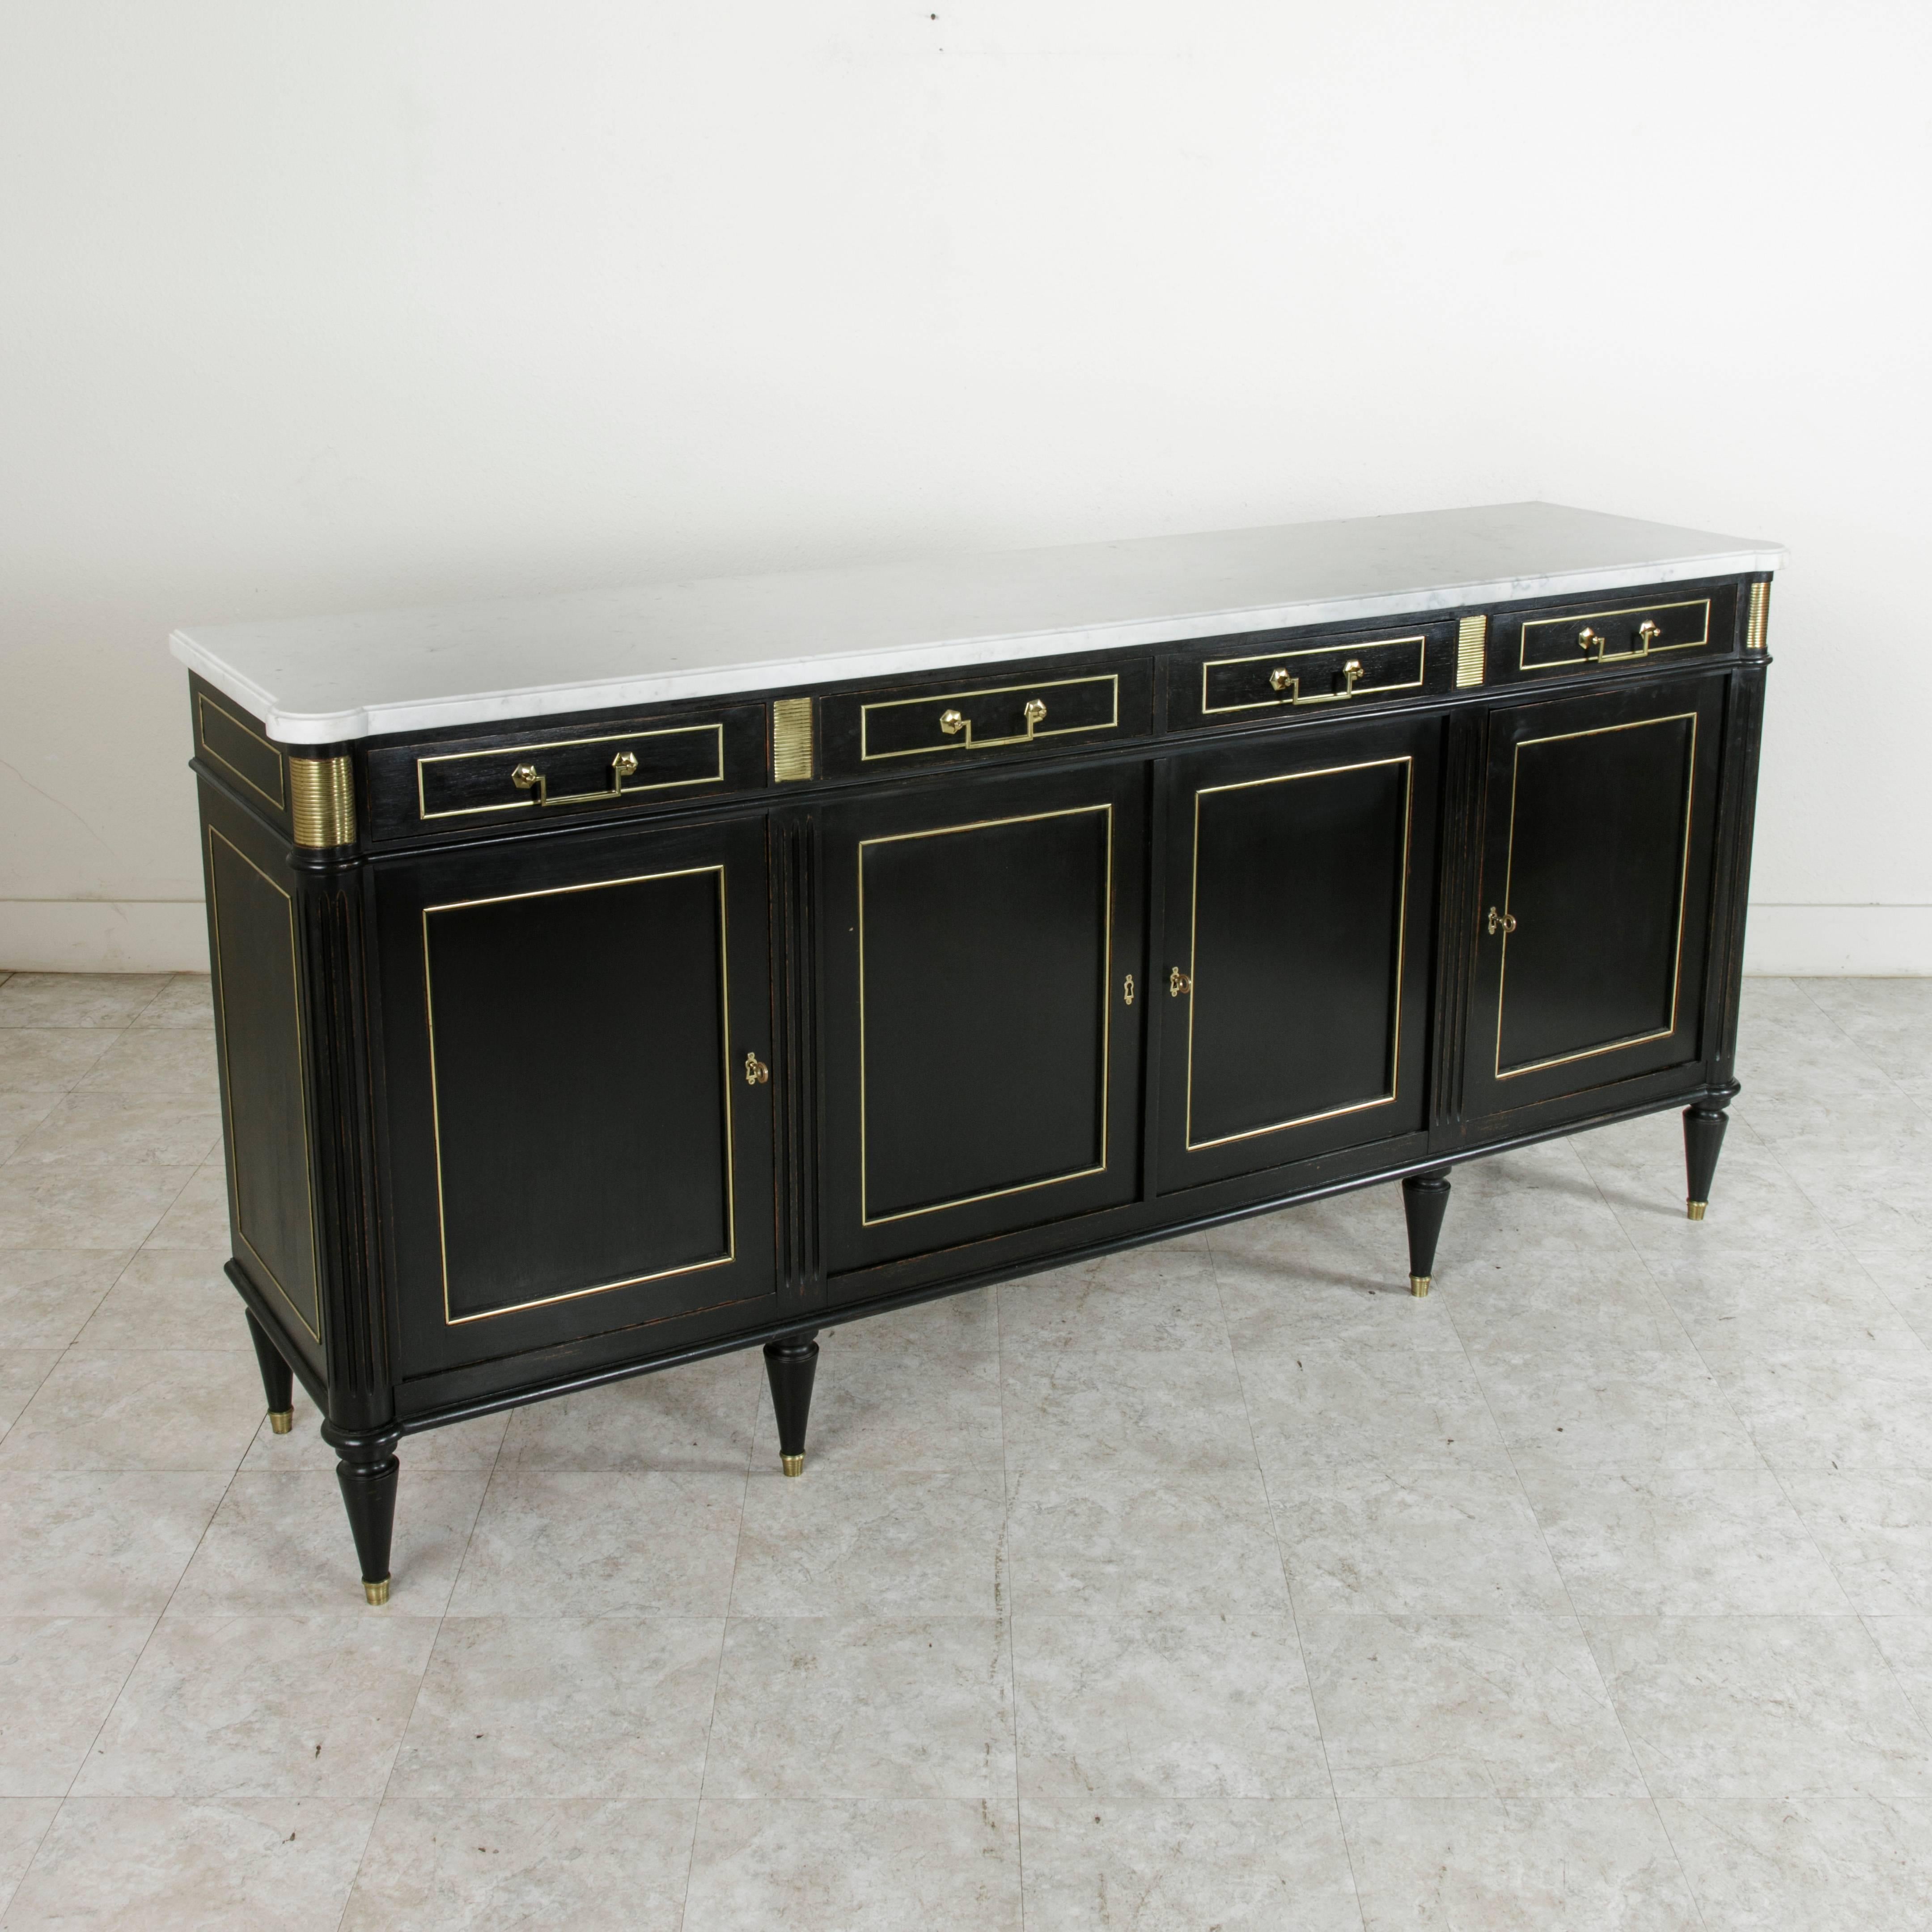 Louis XVI meets midcentury in this striking painted mahogany enfilade or buffet found in Normandy, France. Stunning bronze banding outlines each door, drawer, and panel, while striated bronze plaques define the facade. Its original white marble top